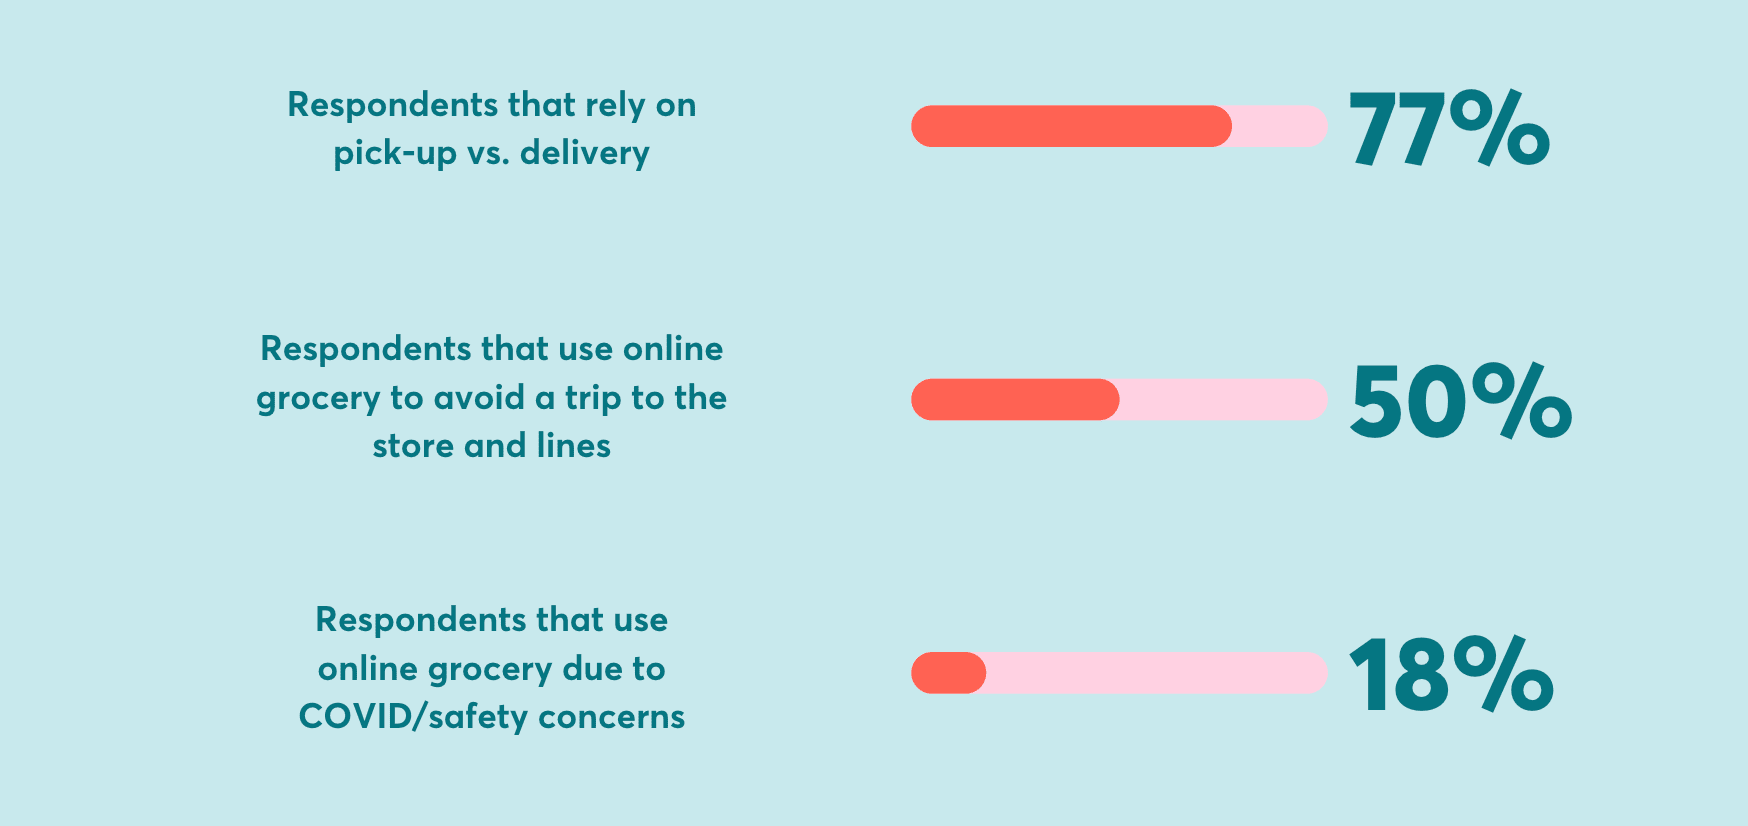 Image showing loading bars and text saying 77% of respondents rely on pickup versus delivery; 50% use online grocery to avoid a trip to the store; 18% use online grocery due to COVID/safety concerns